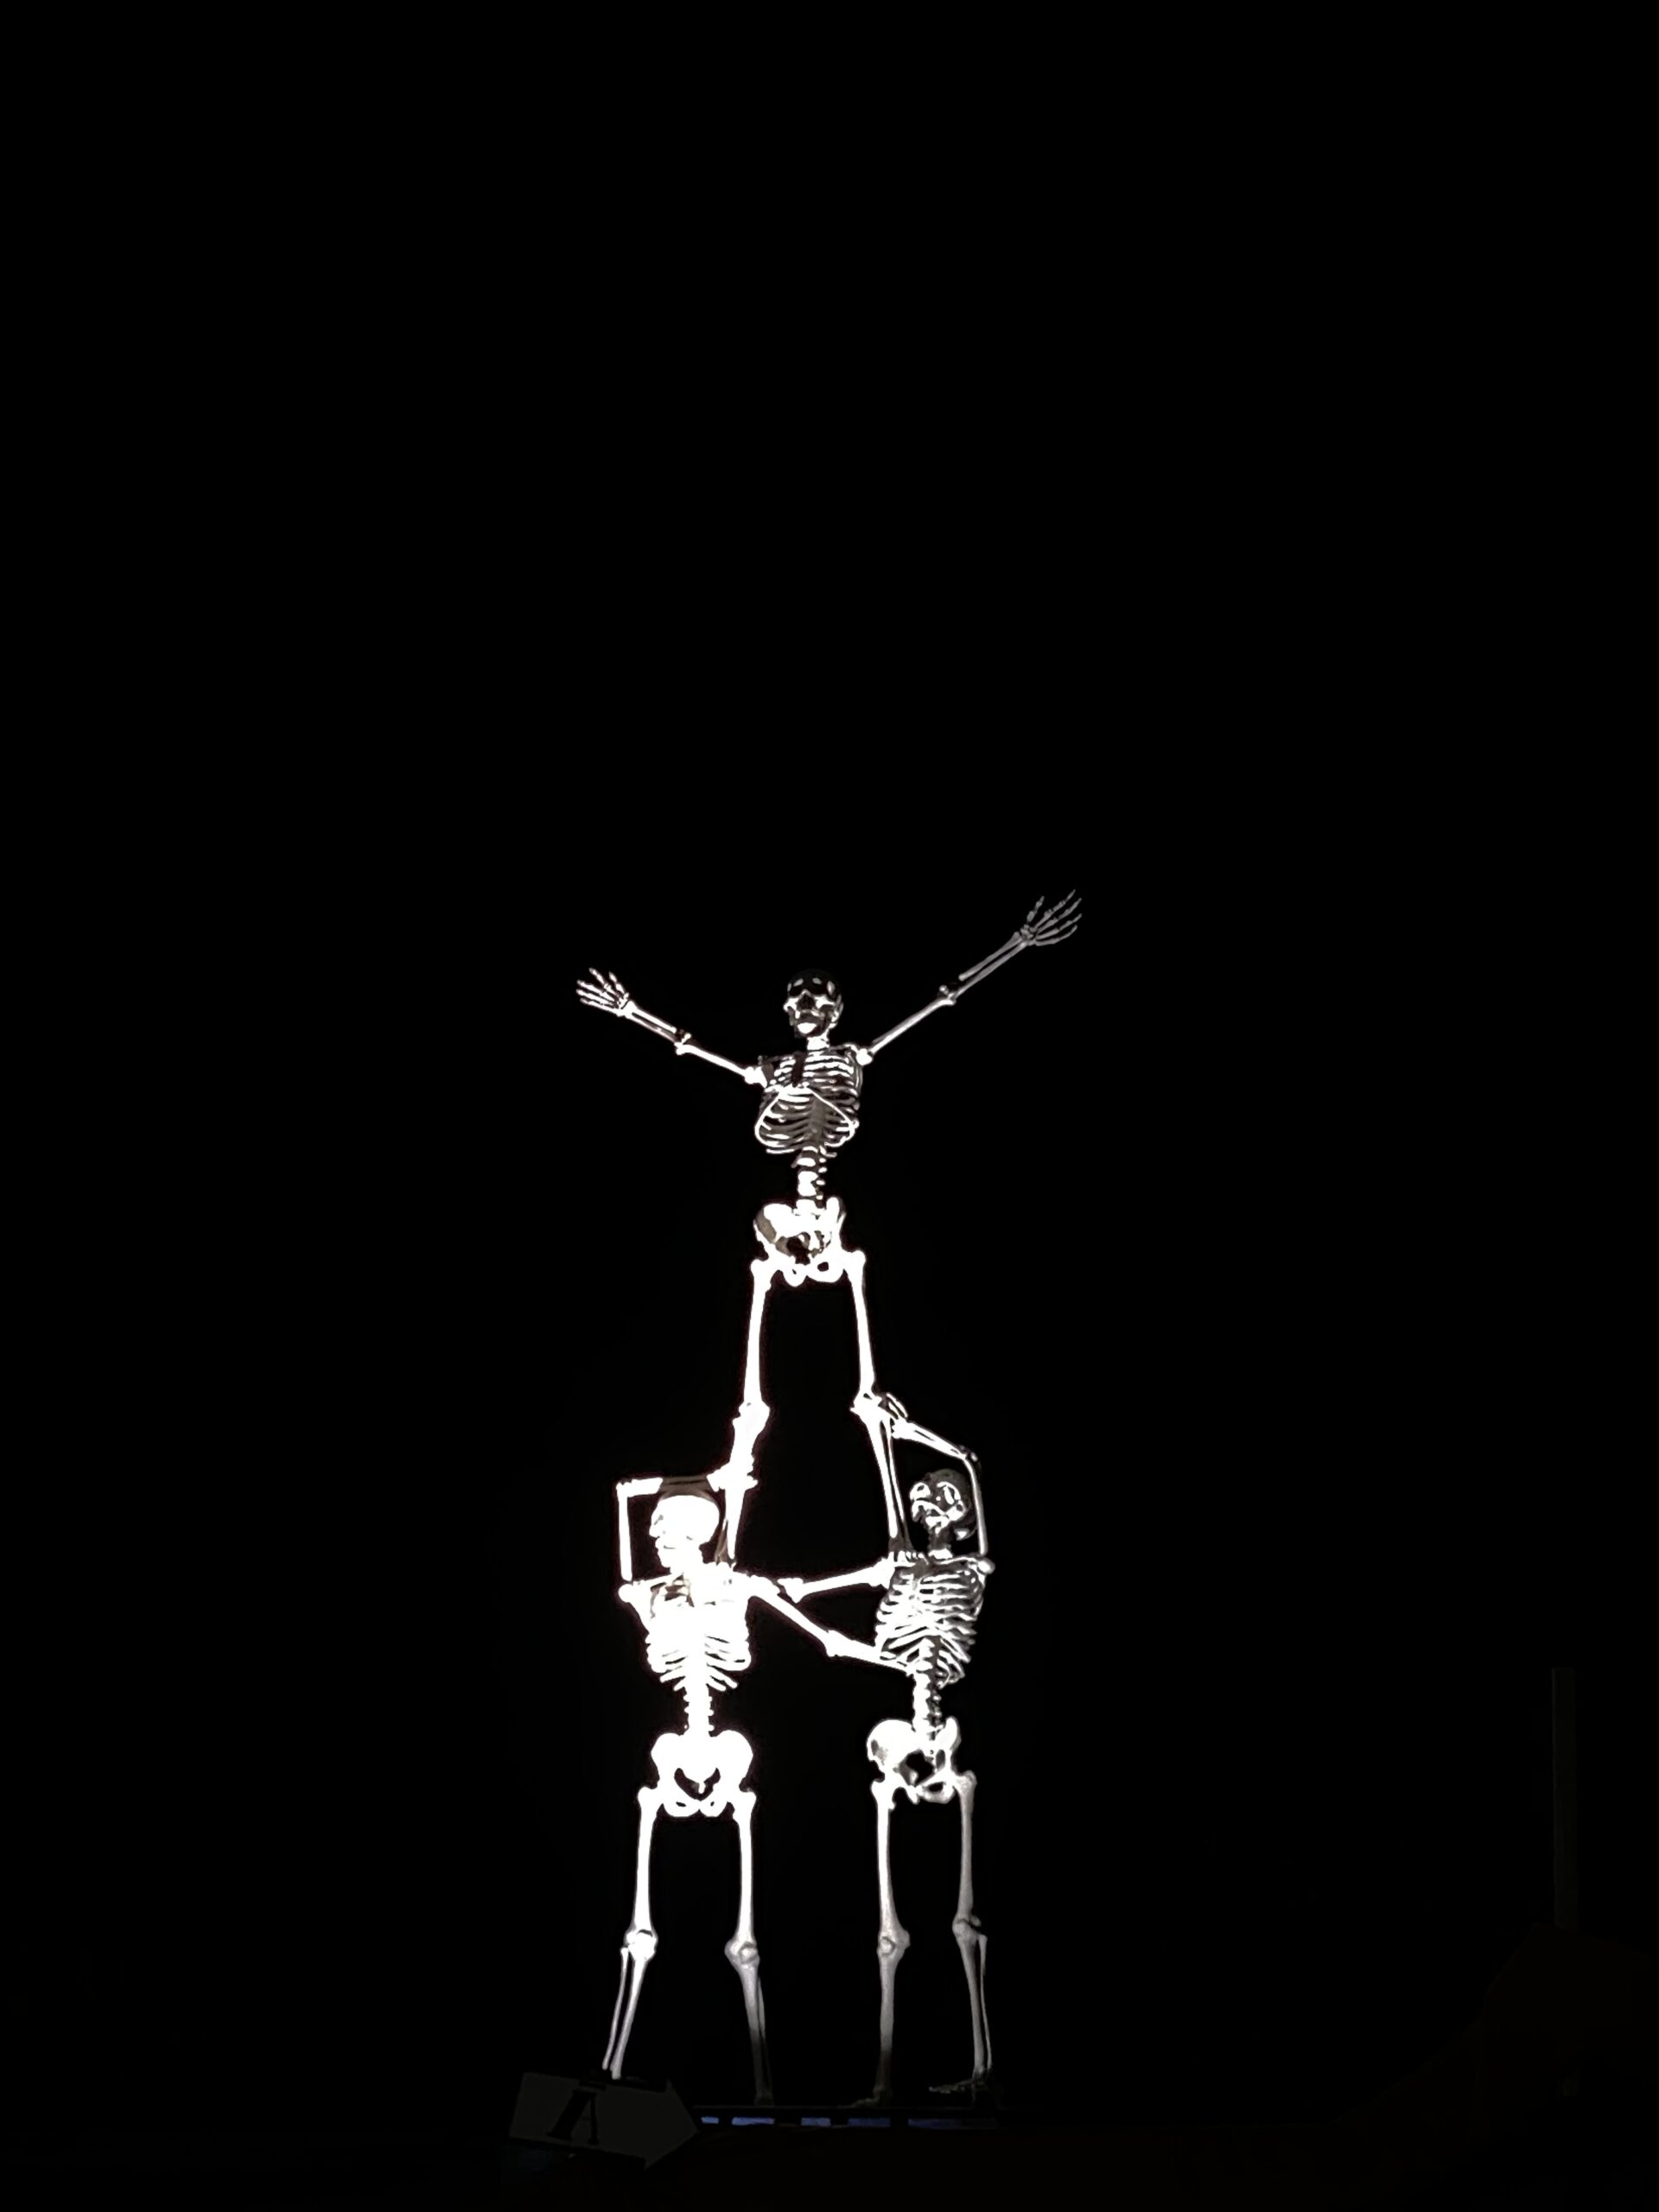 Acrobats Skeleton Sculpture by Wilfred Pritchard from The Sculpture Park at Glastonbury, lit up